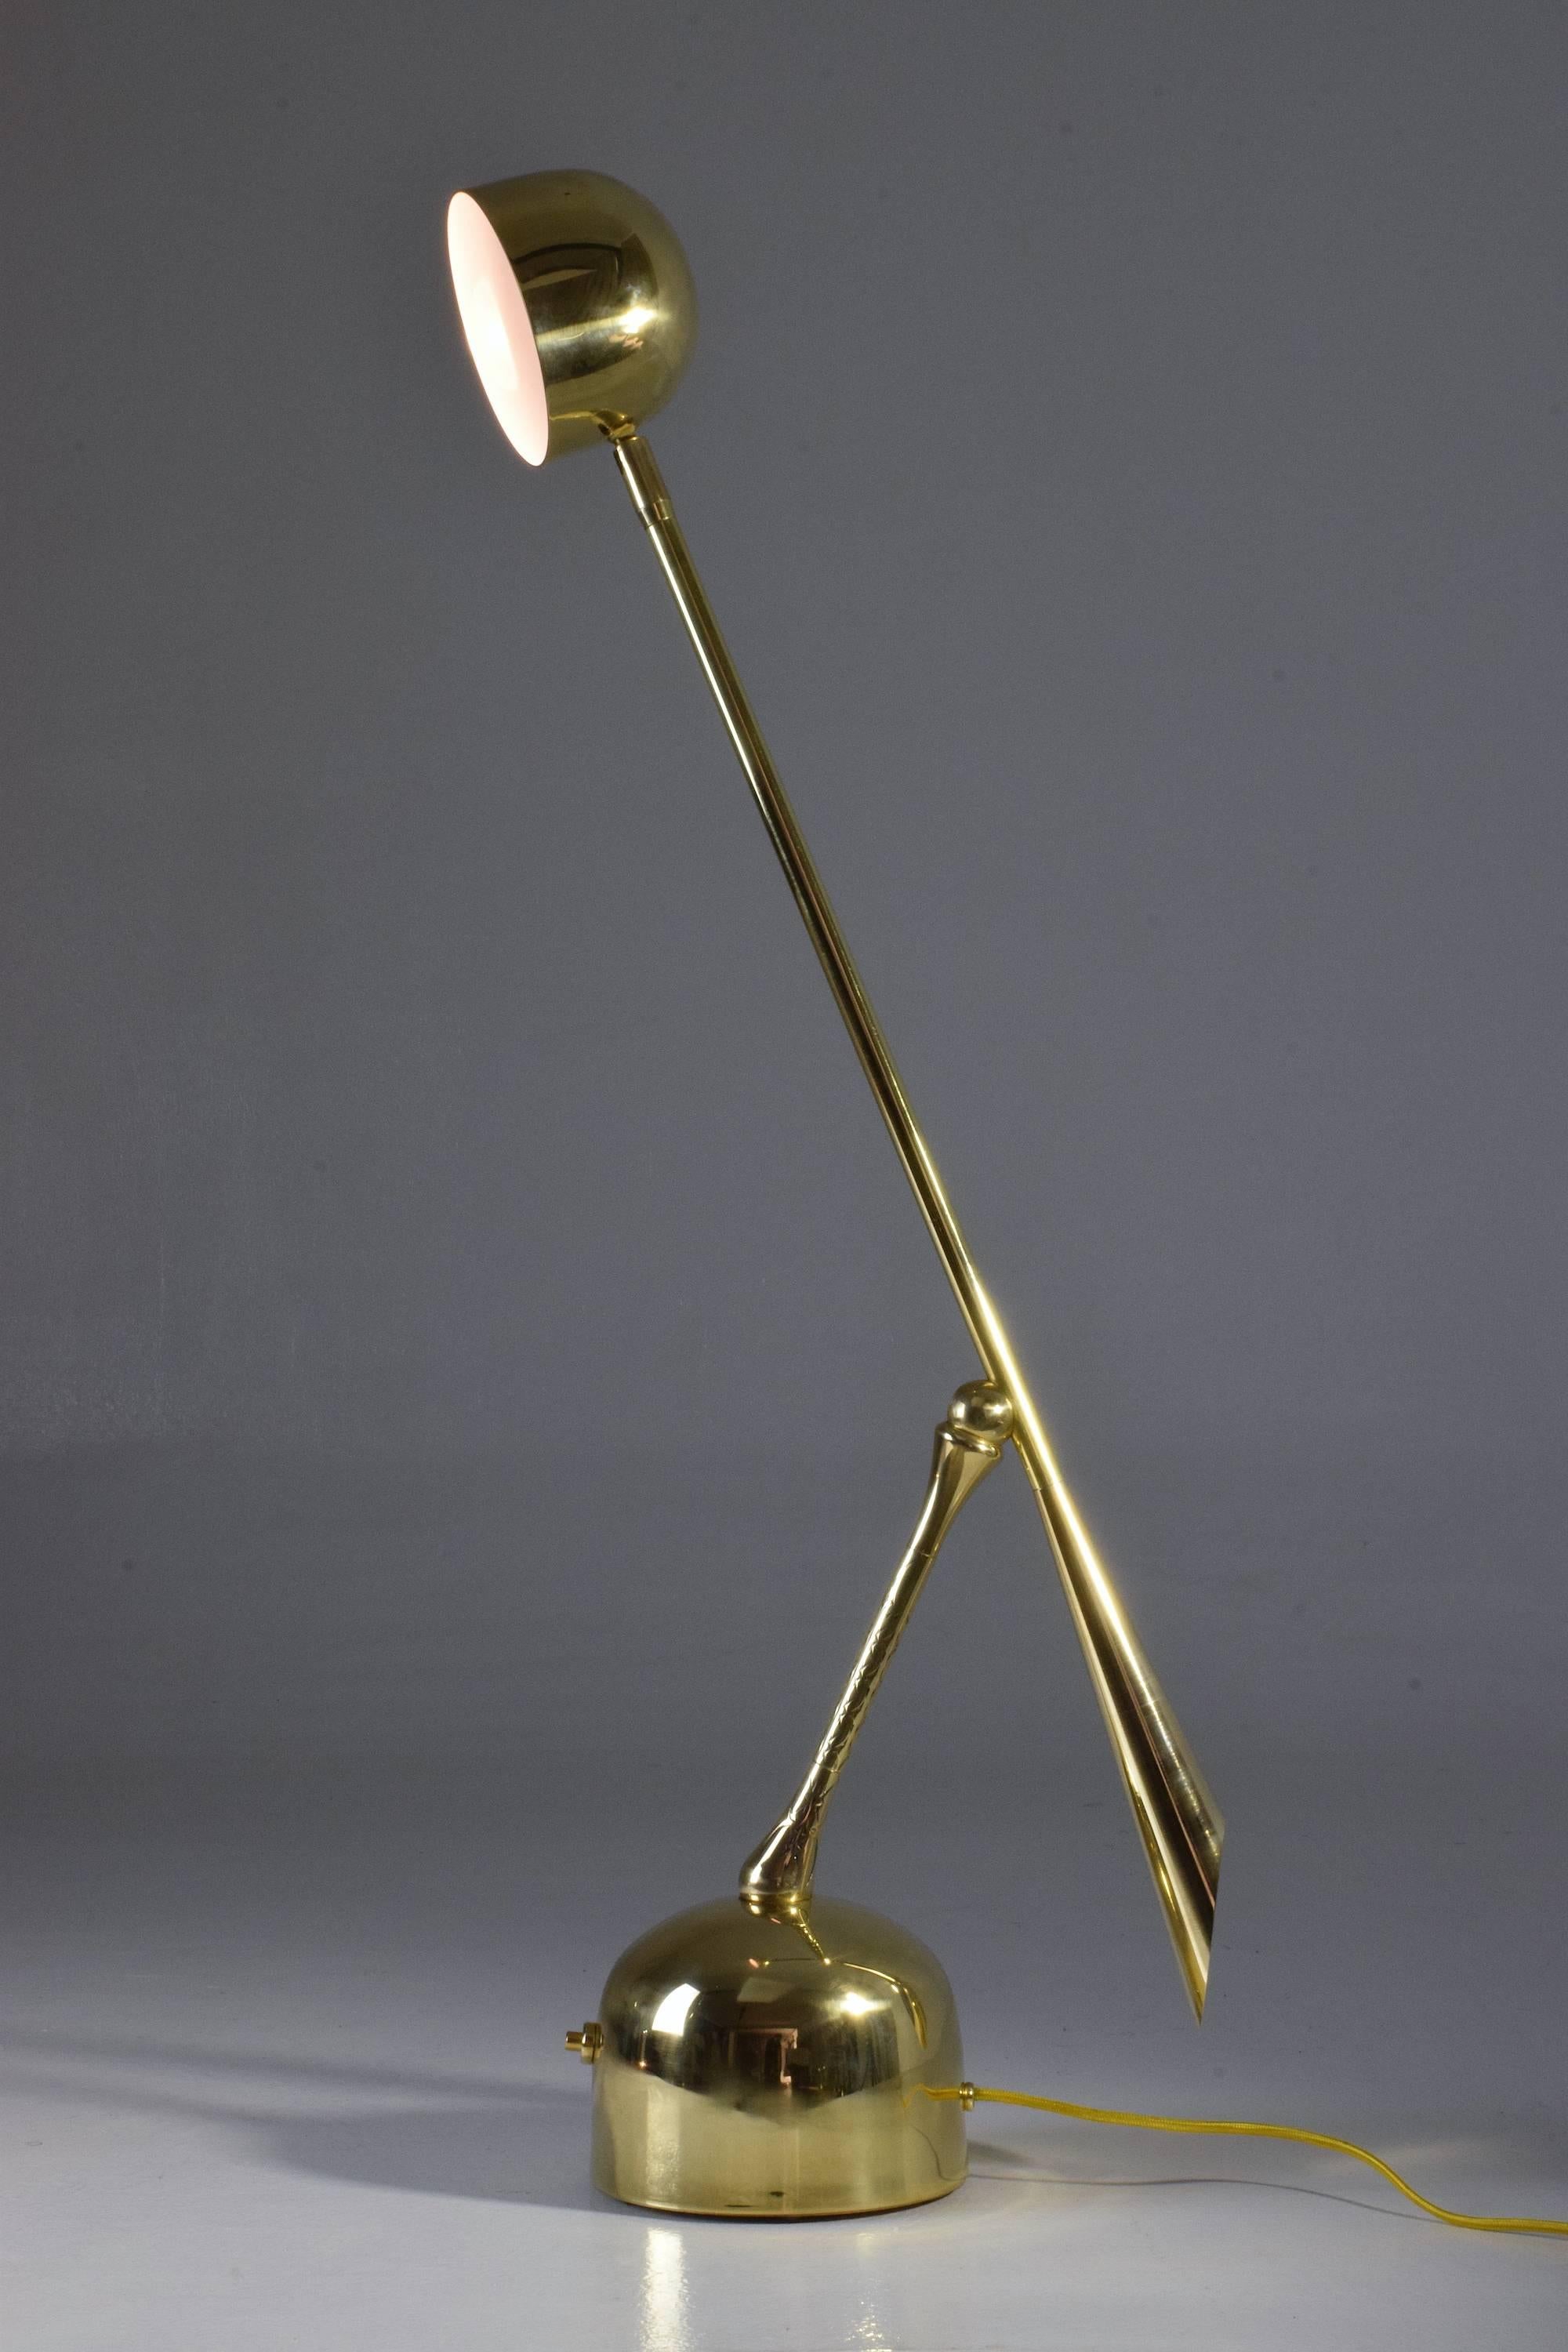 Continuum-II Contemporary Articulating Brass Table Lamp, Flow Collection (Moderne)